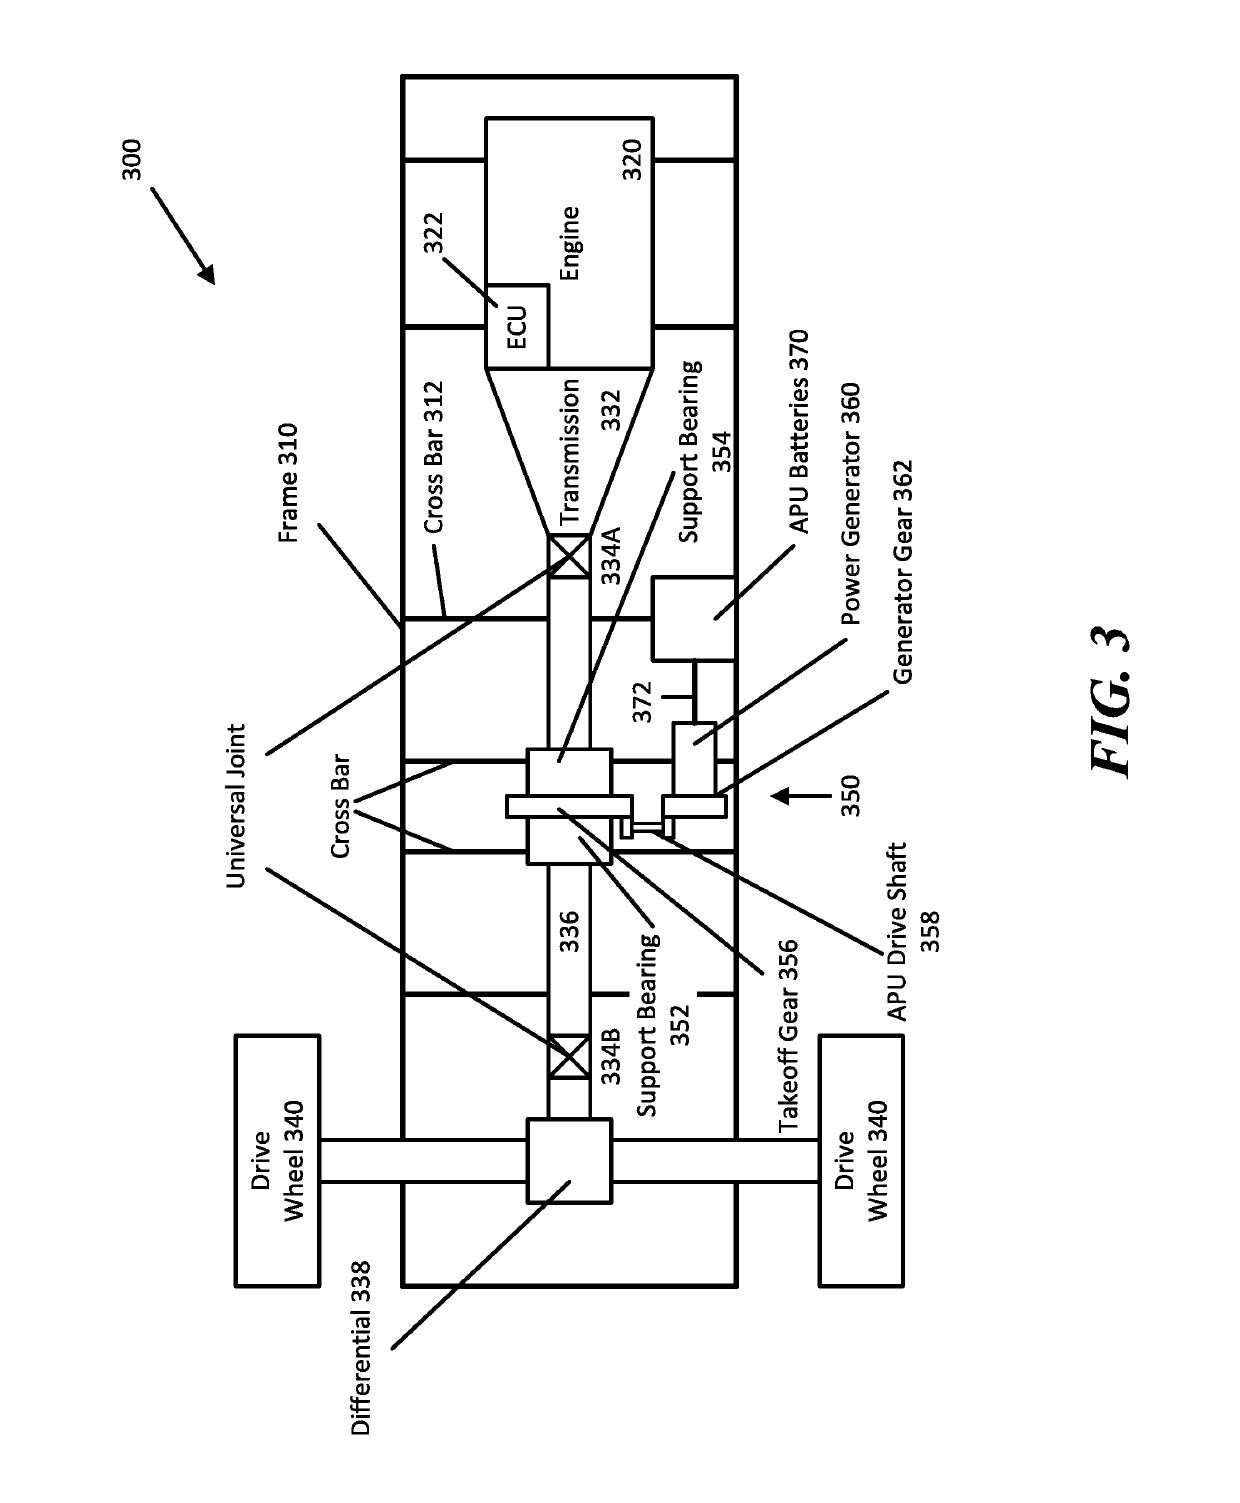 Method and system for auxiliary power generation